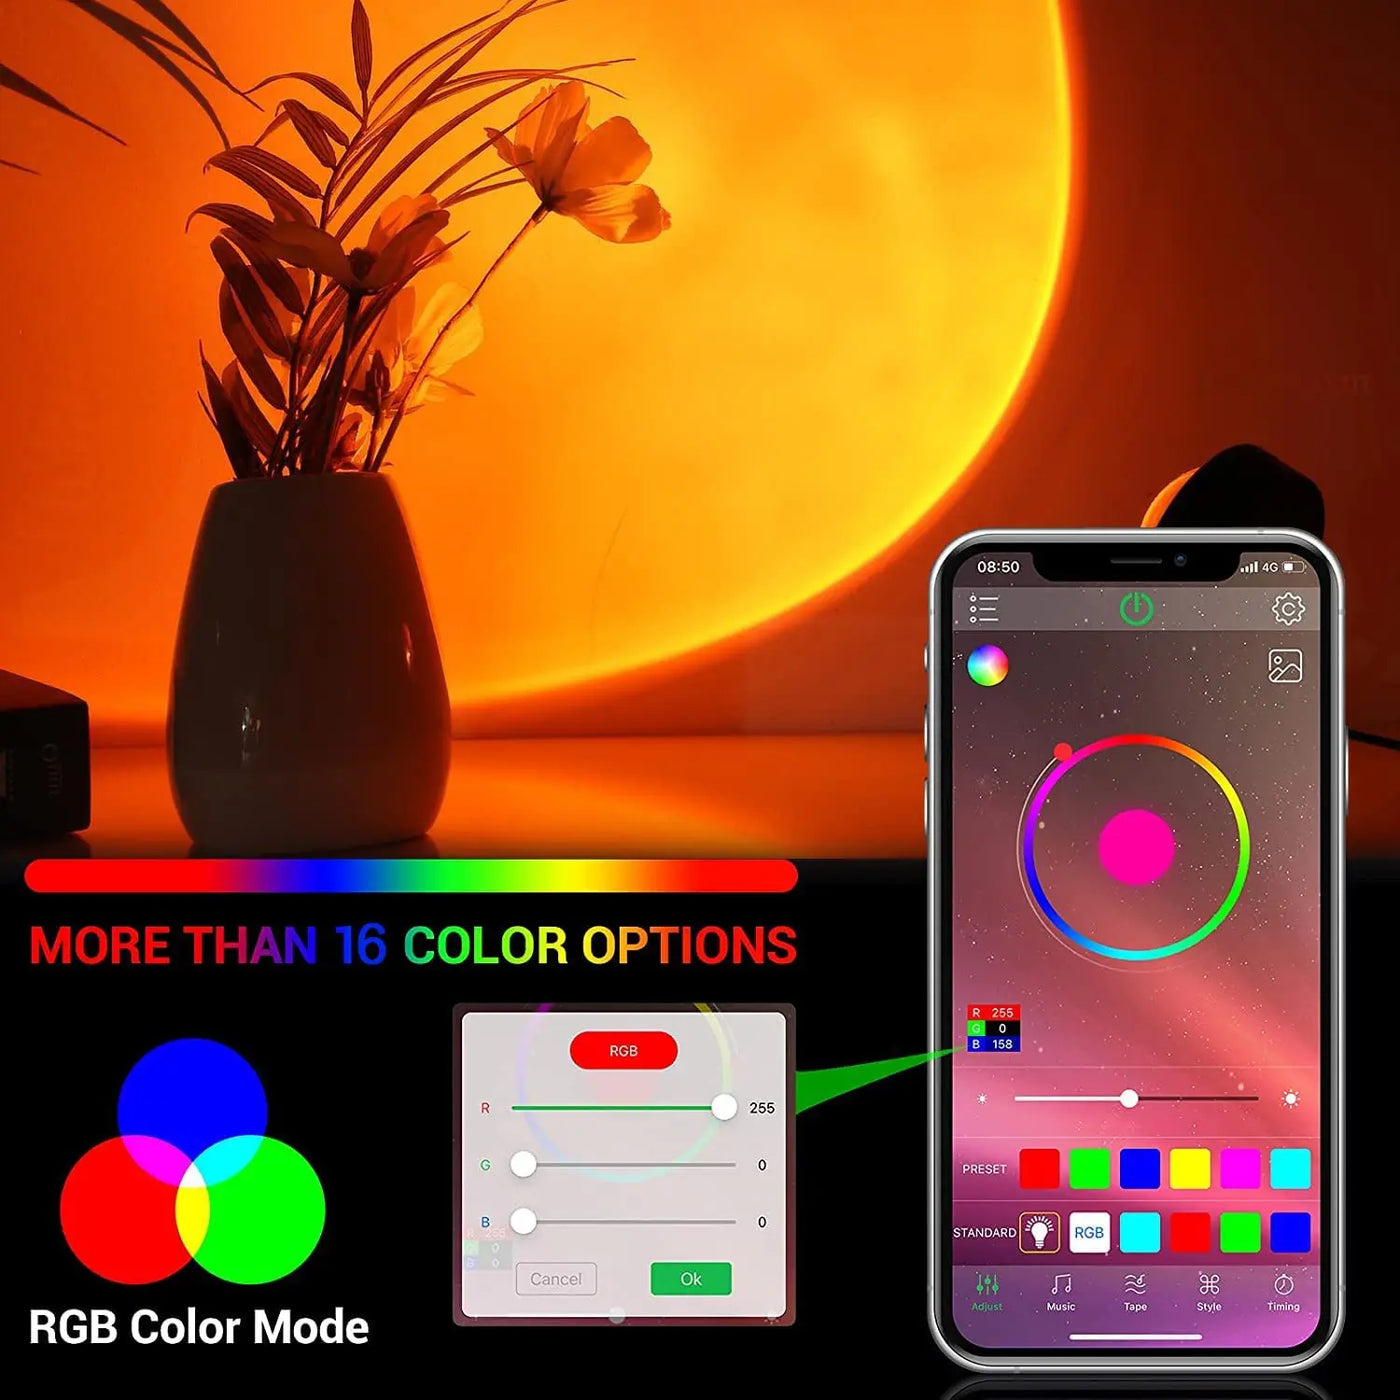 Smart Bluetooth Rainbow Sunset Projector Table Lamp - Home and Coffee Shop Background Wall Decoration Atmosphere